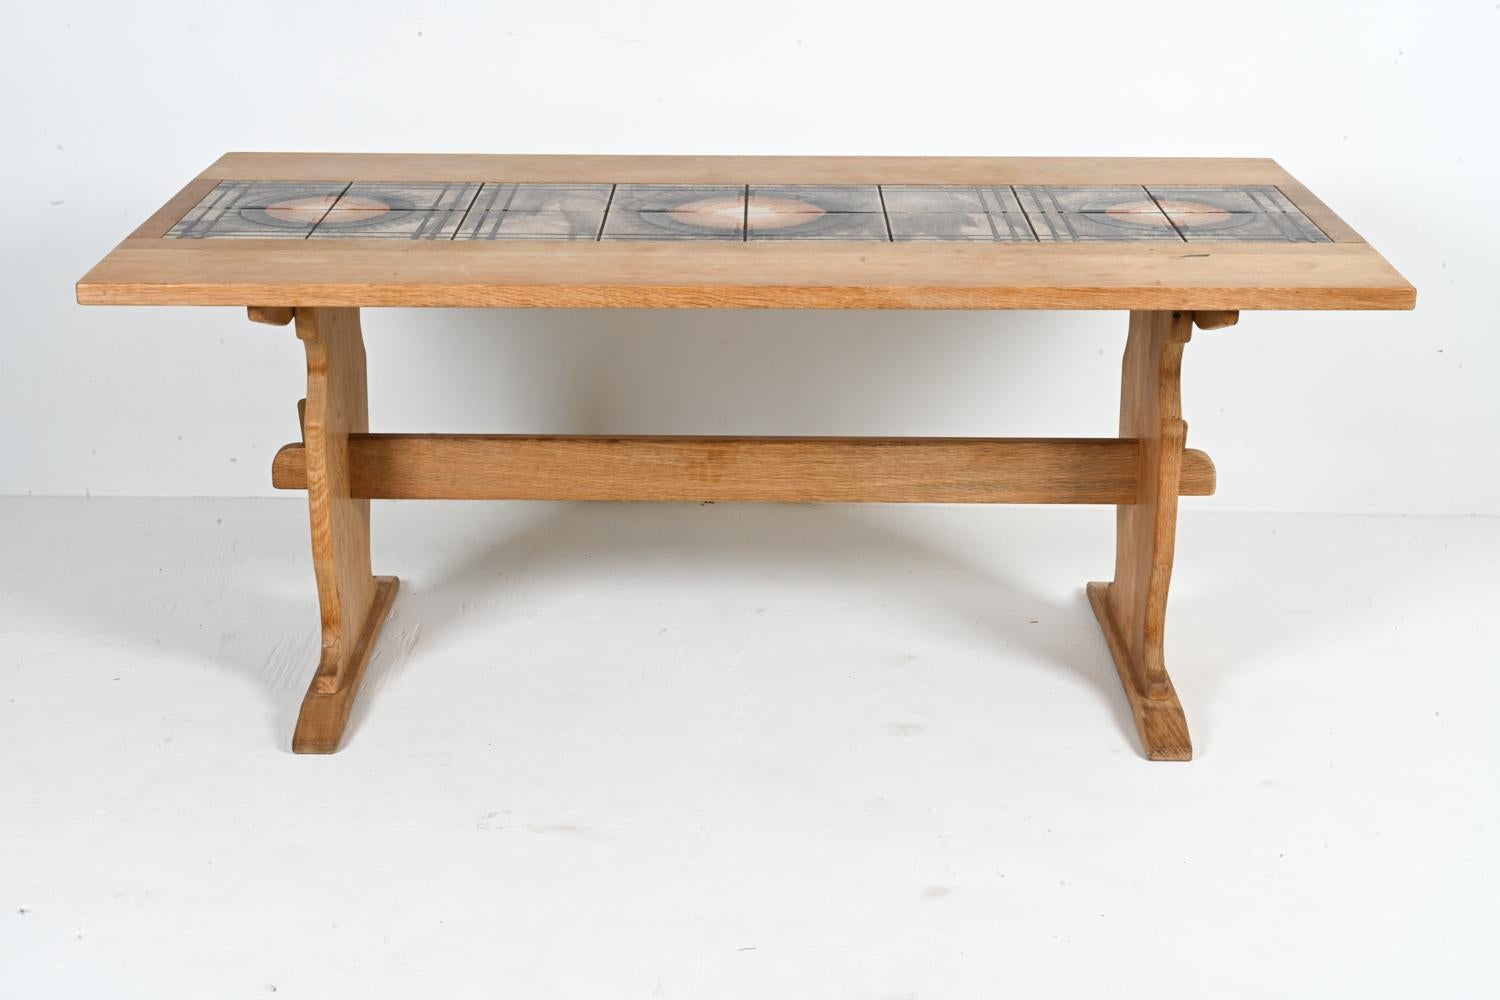 Danish Ox Art Oak & Ceramic Tile Mosaic-Top Dining Table With Leaves, c. 1970's In Good Condition For Sale In Norwalk, CT